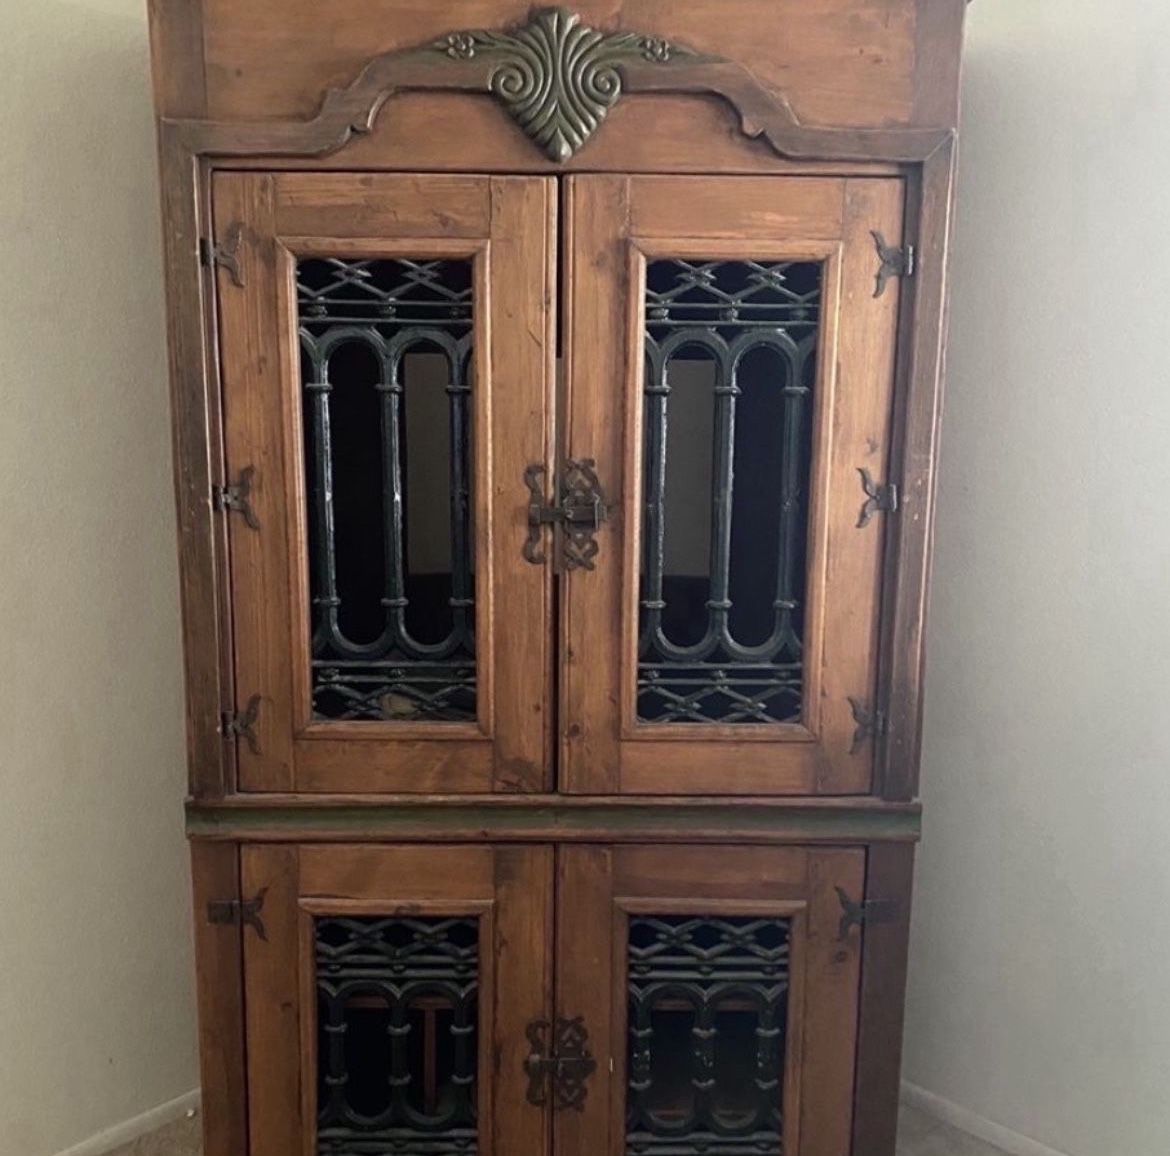 Beautiful Solid Wood / Iron Armoire - Well Made,  - 27 Inches Deep ,  45 Inches wide,  76inches Tall